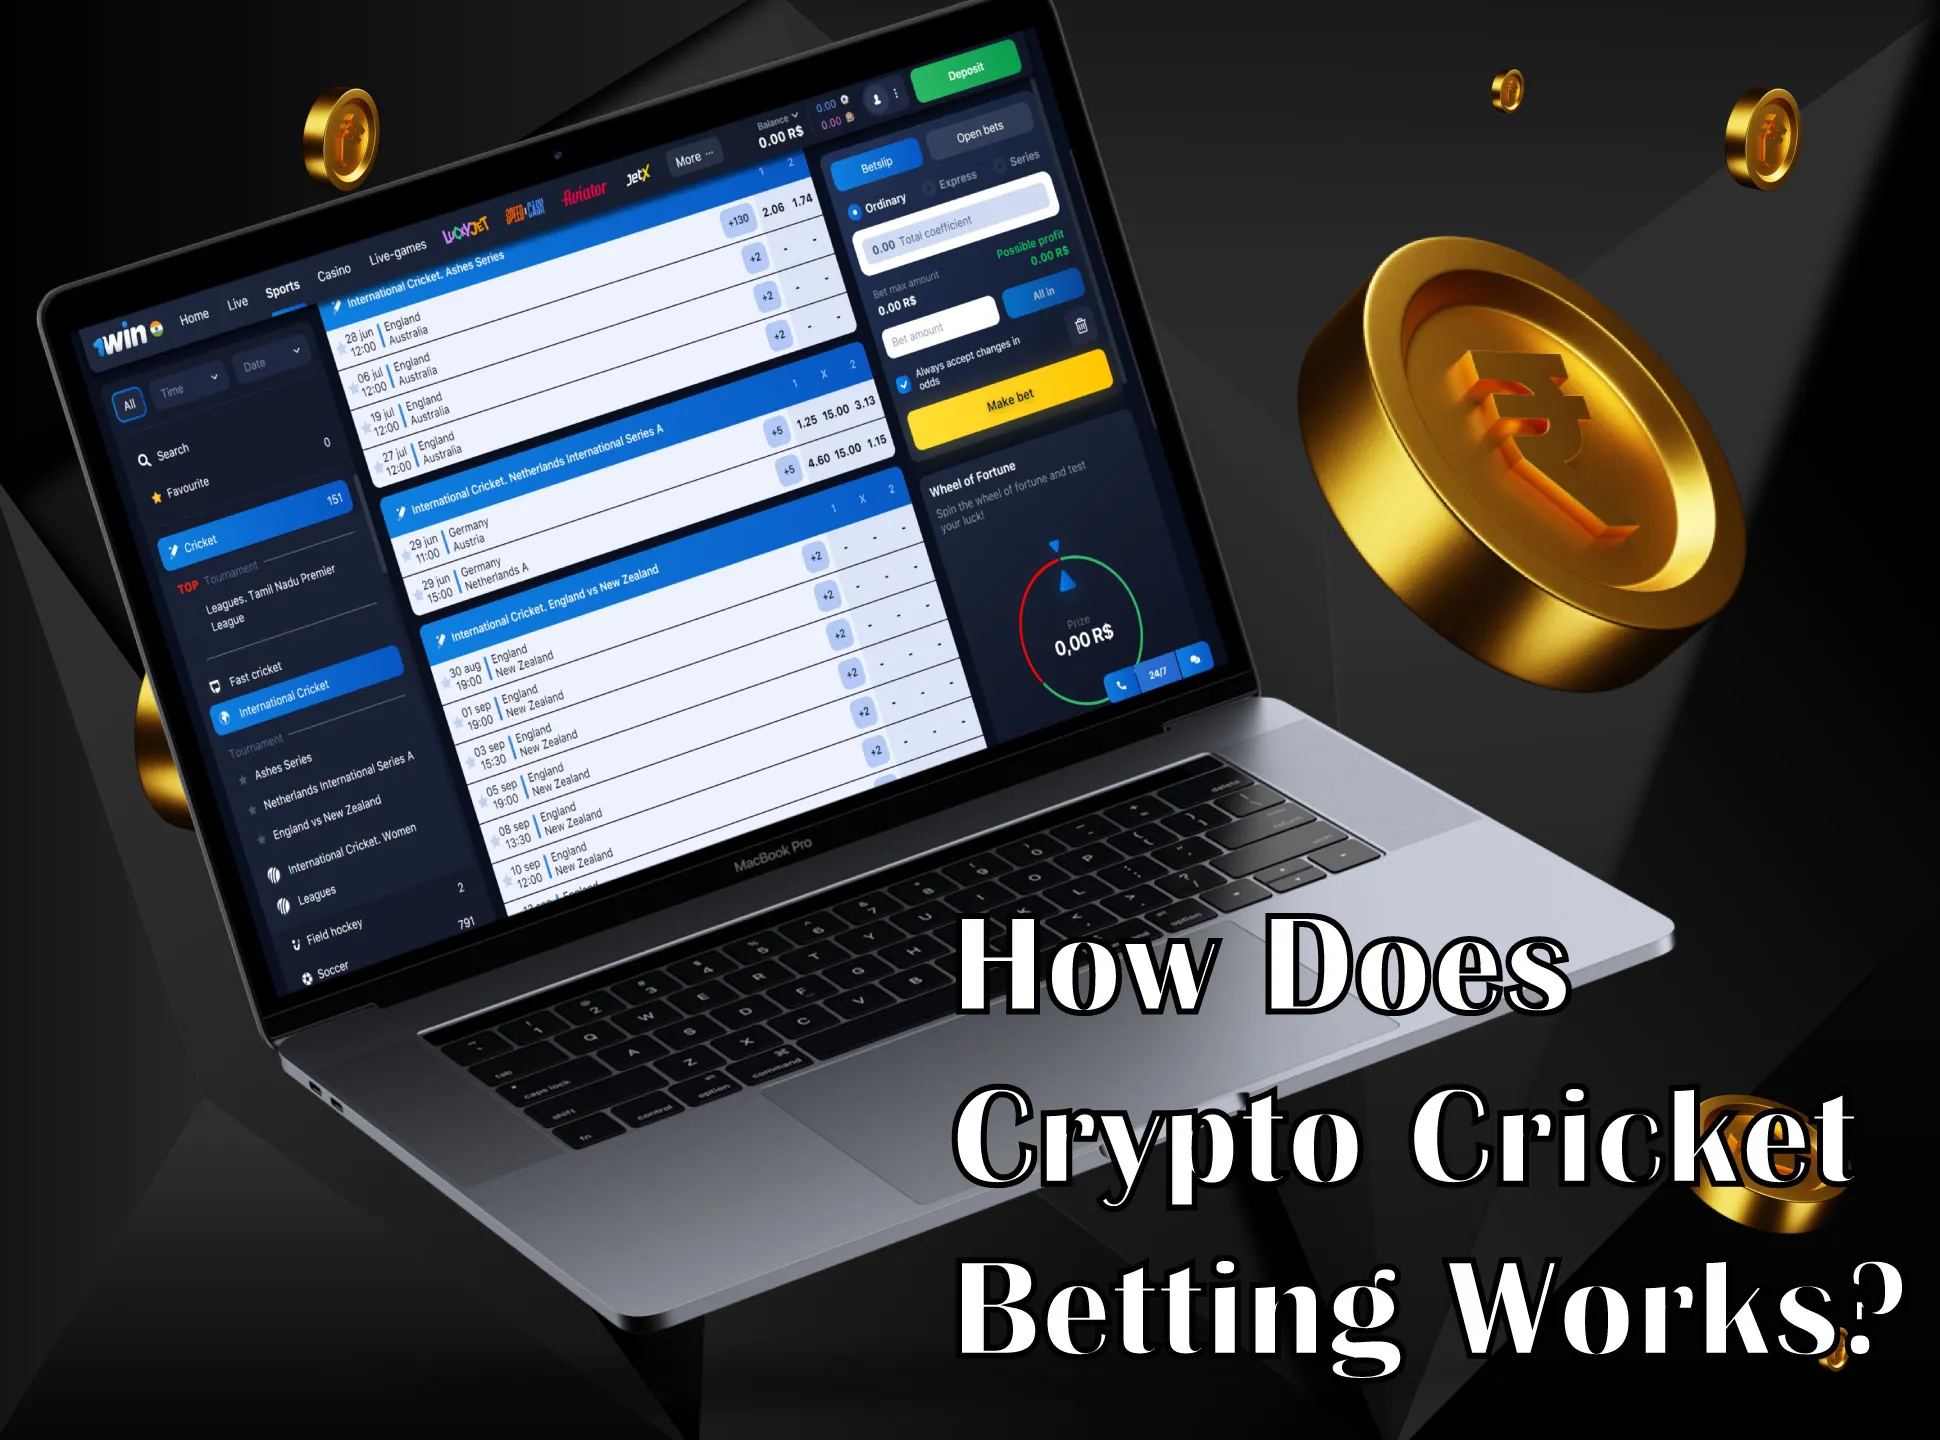 You can bet on sports events as usually but using the cryptocurrency as a deposit method.